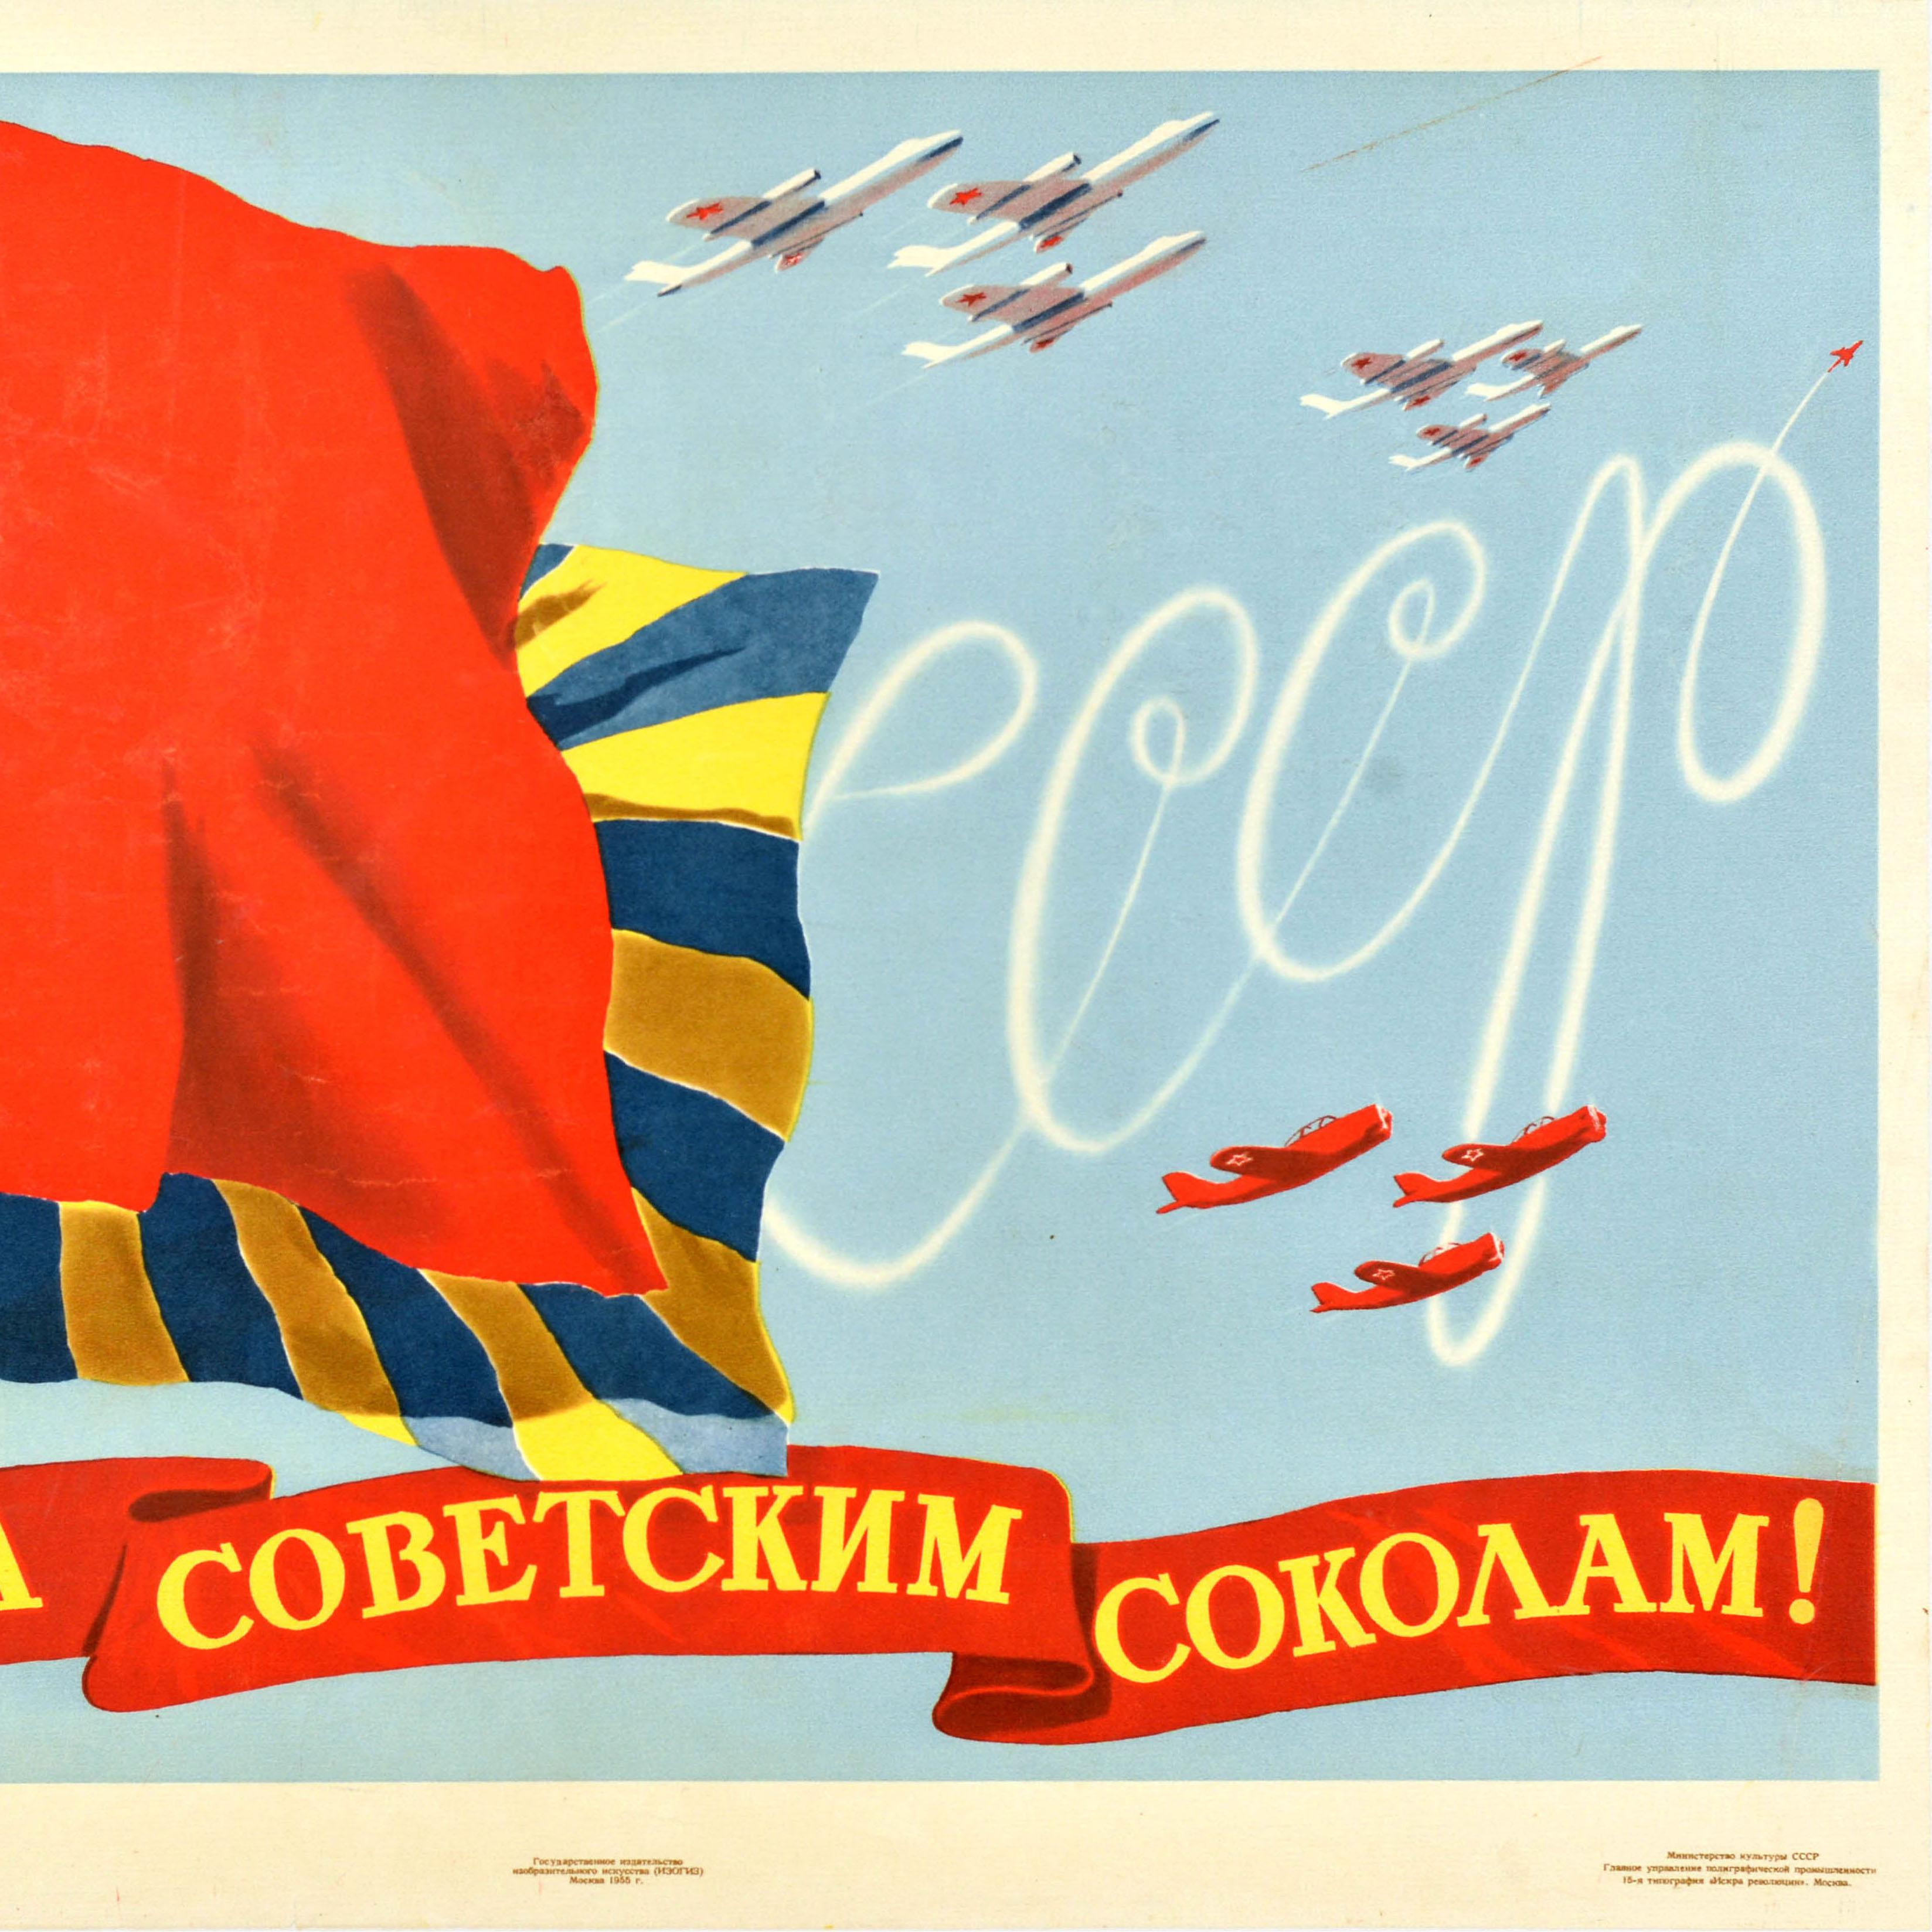 Original vintage Soviet aviation propaganda poster - Слава Советским Соколам! / Glory to the Soviet Falcons - featuring a dynamic military illustration of the red hammer and sickle flag and the flag of the Soviet Air Force with various fighter